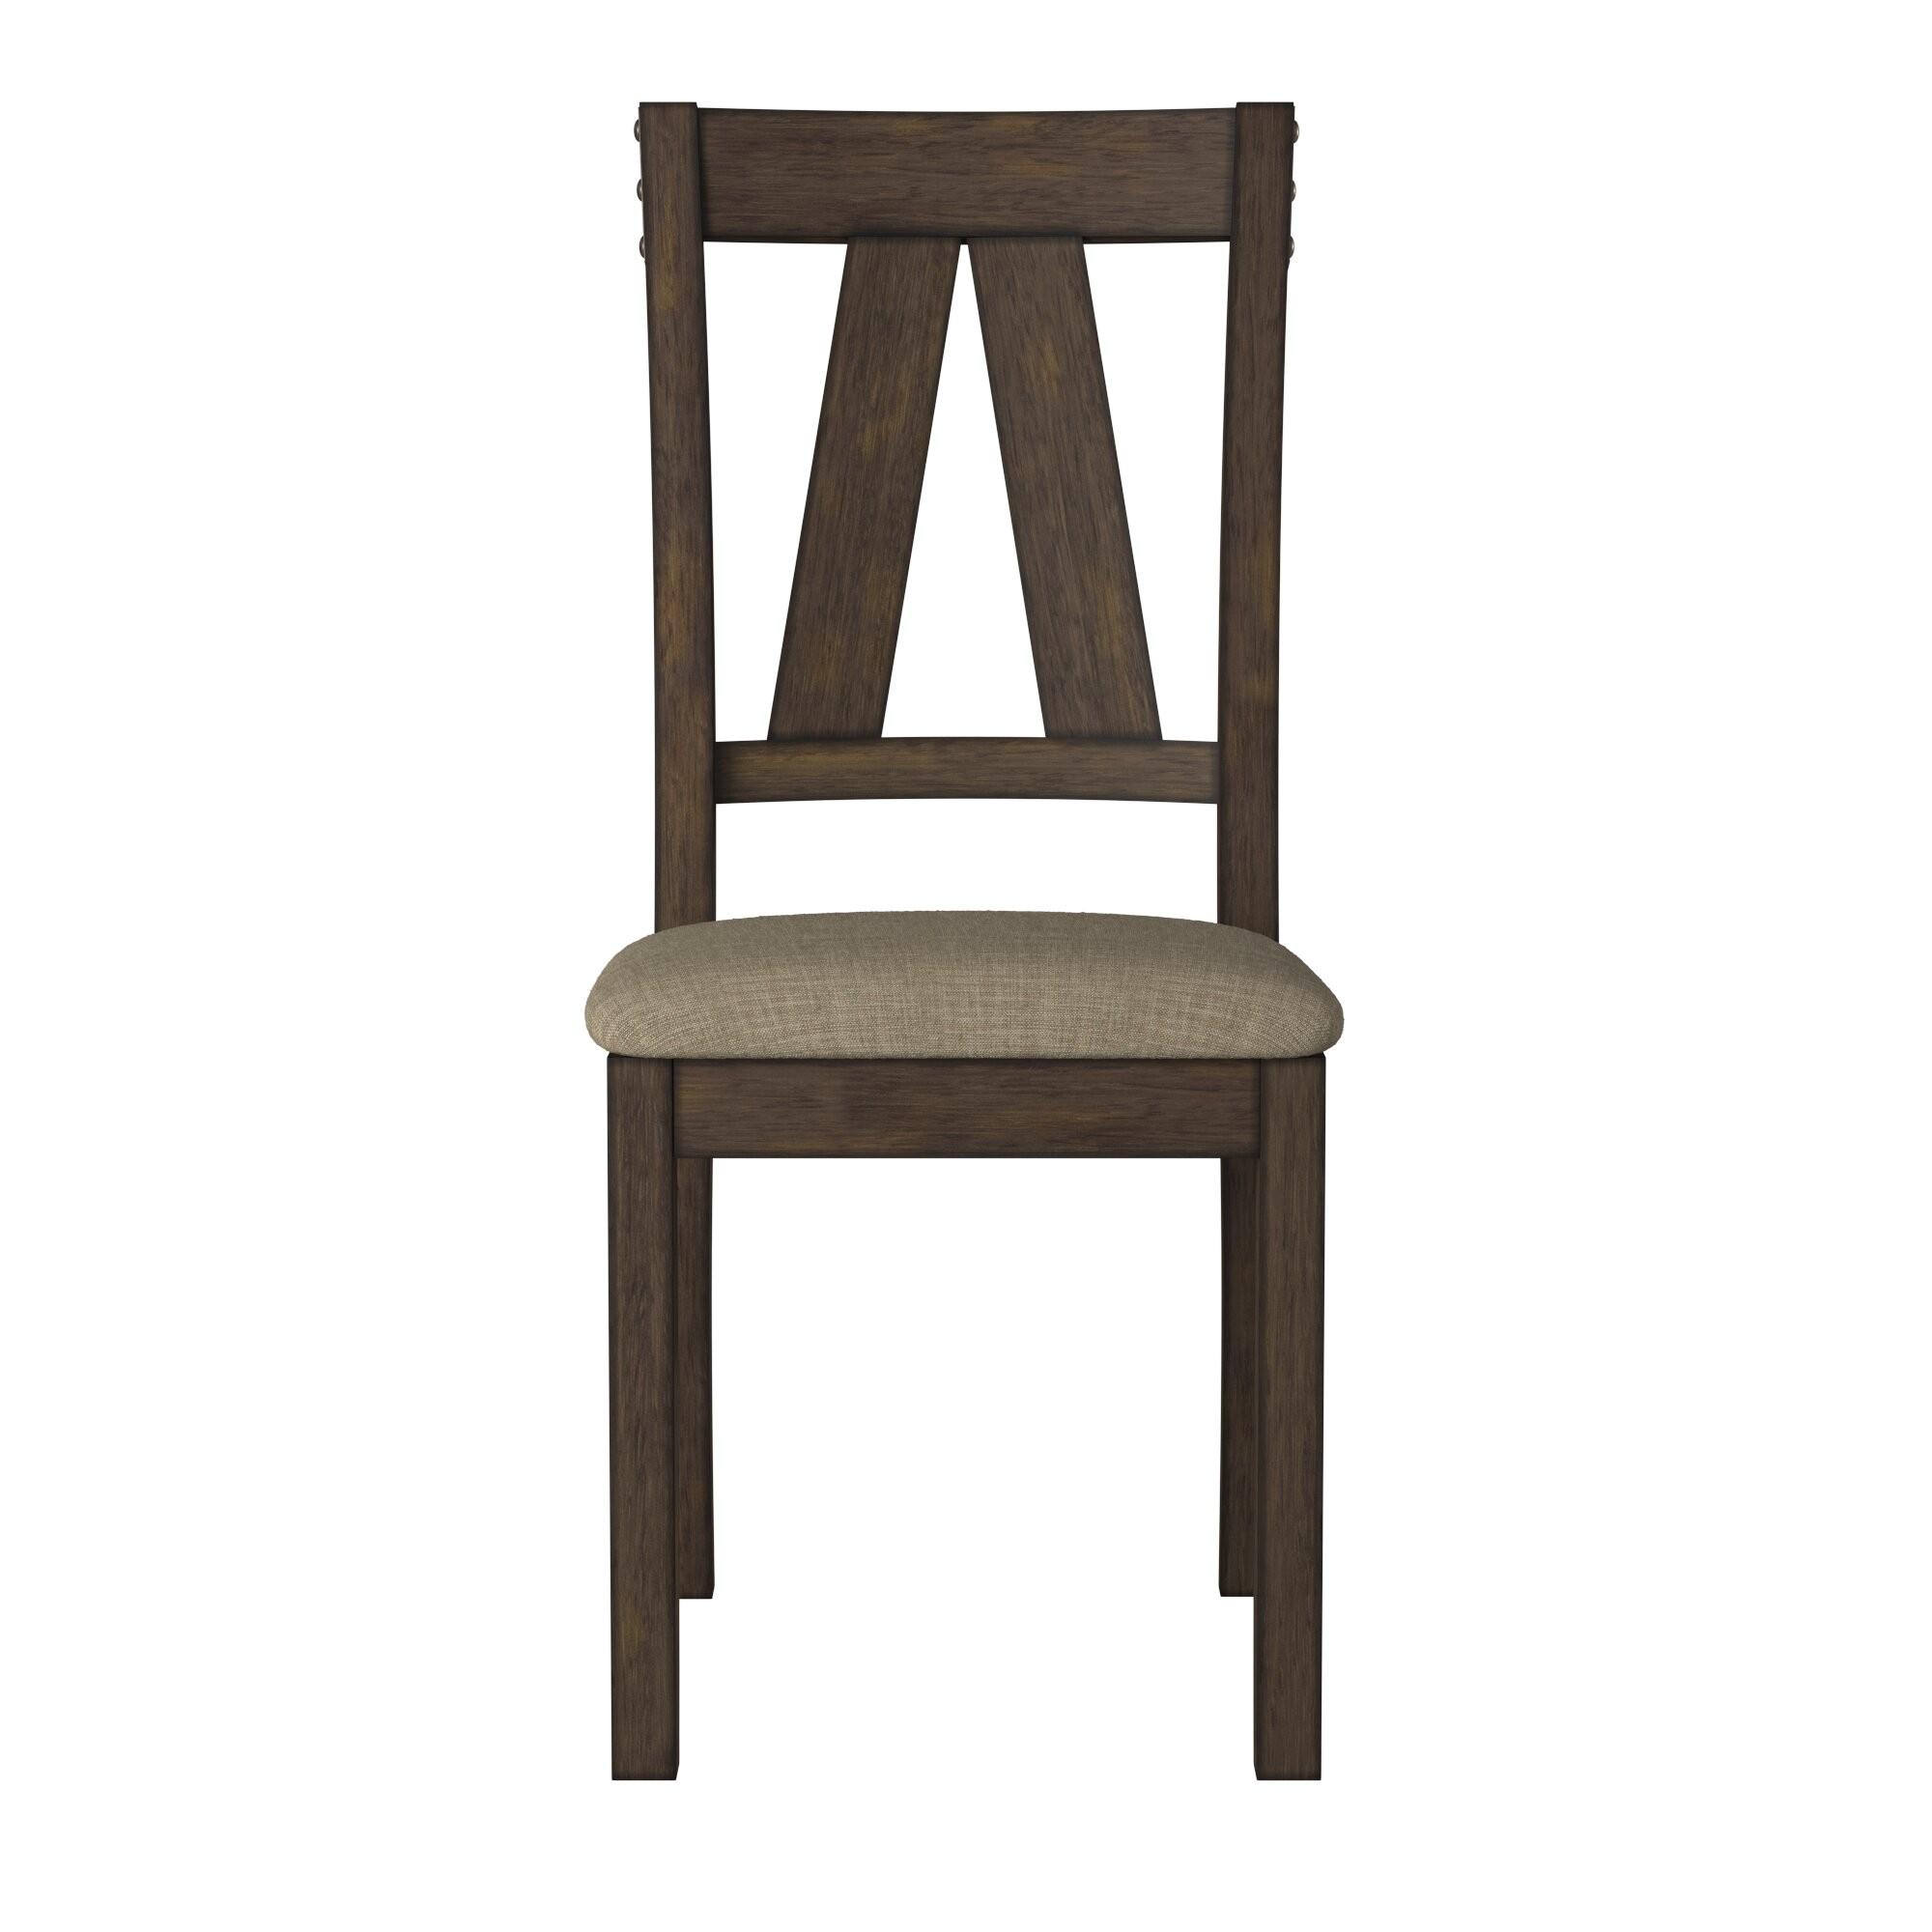 Rustic Side Chair Set 5518S Mattawa 5518S in Brown Cotton